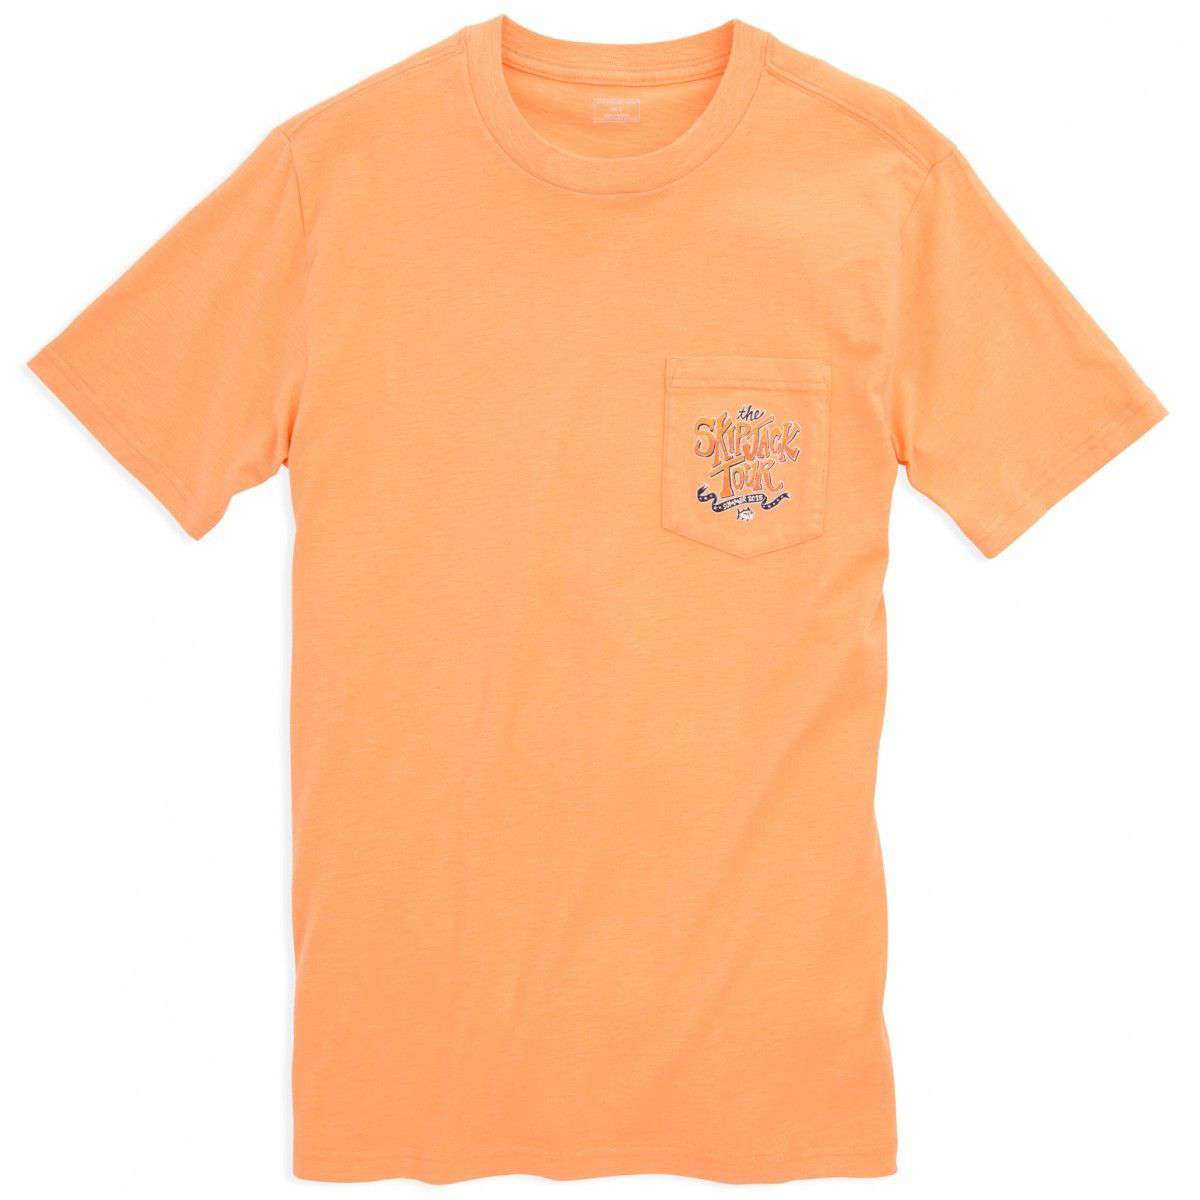 The Skipjack Tour Tee-Shirt in Horizon Orange by Southern Tide - Country Club Prep